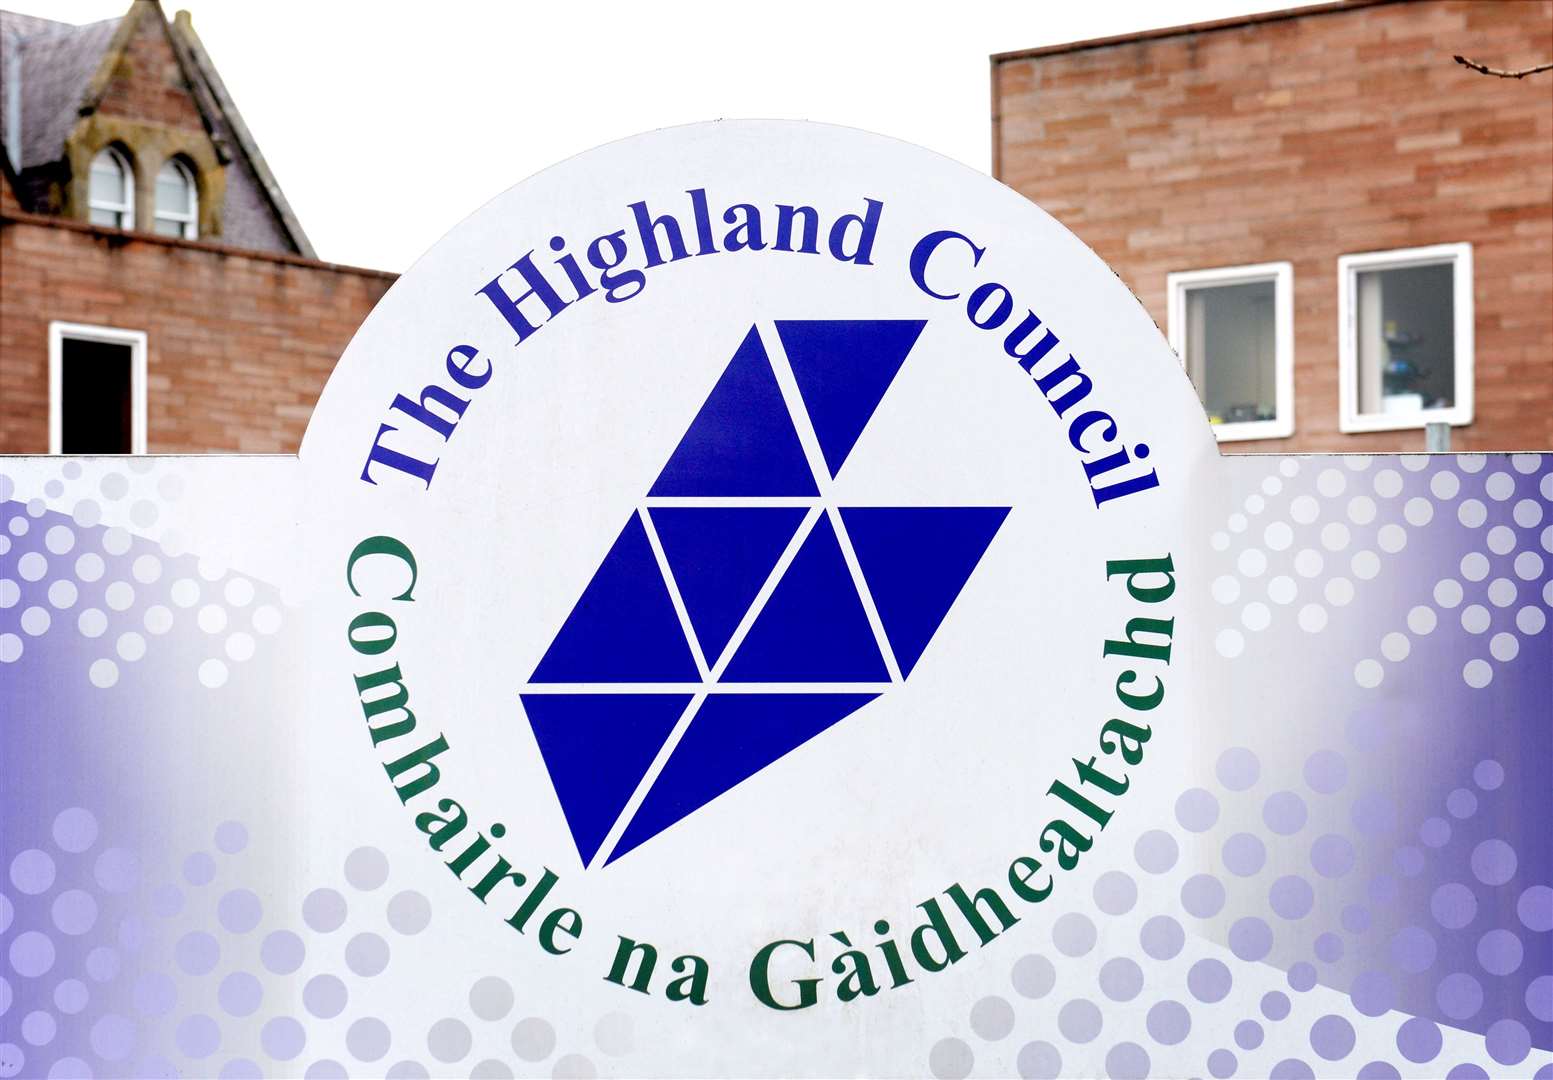 Highland Council received a £2.2 million cash injection for education which will go on 52 teaching staff.